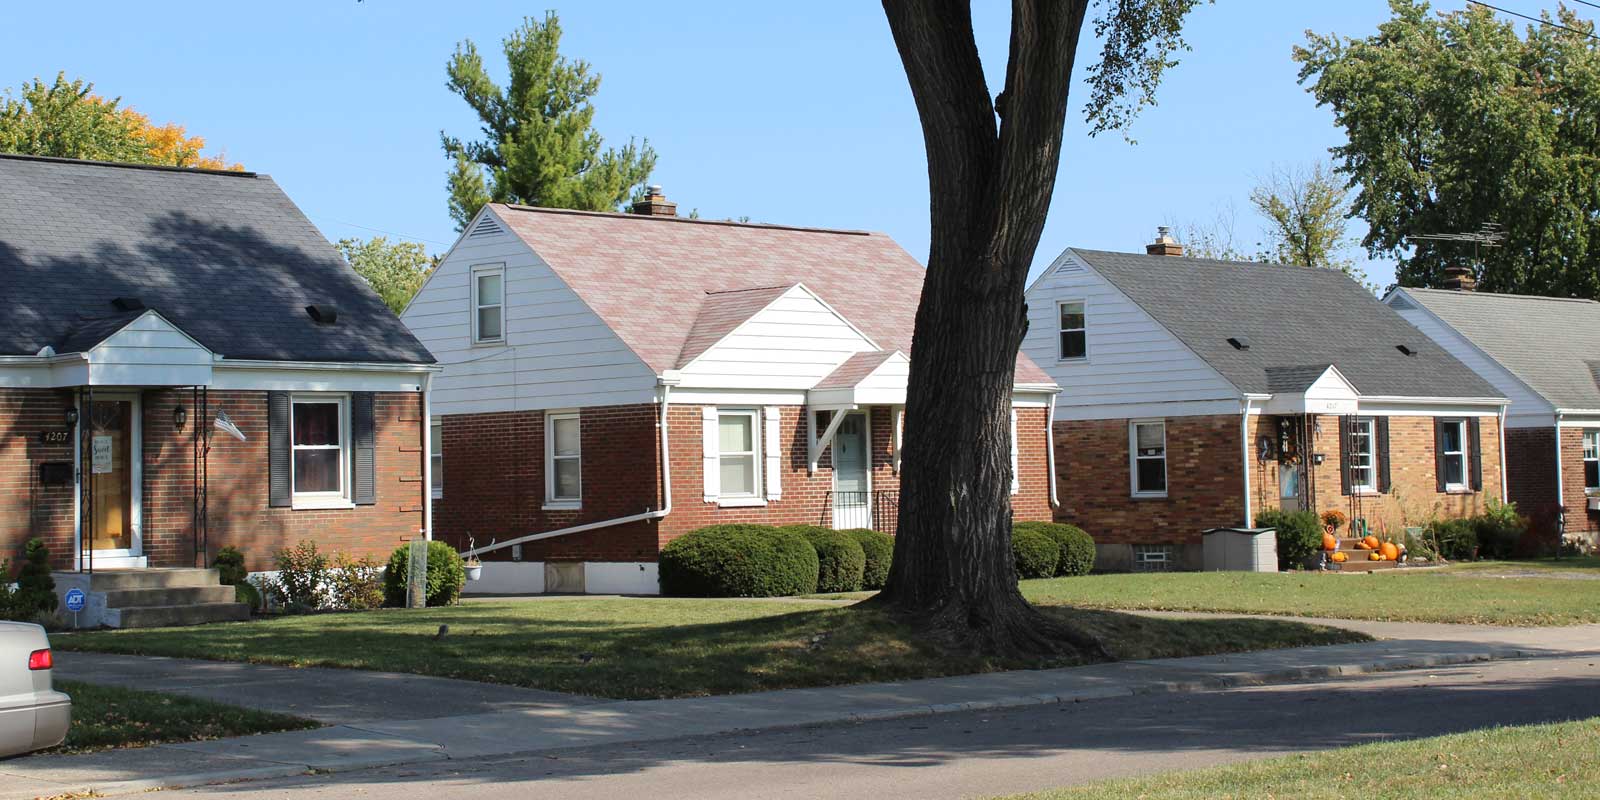 Homes in Hearthstone, Dayton OH